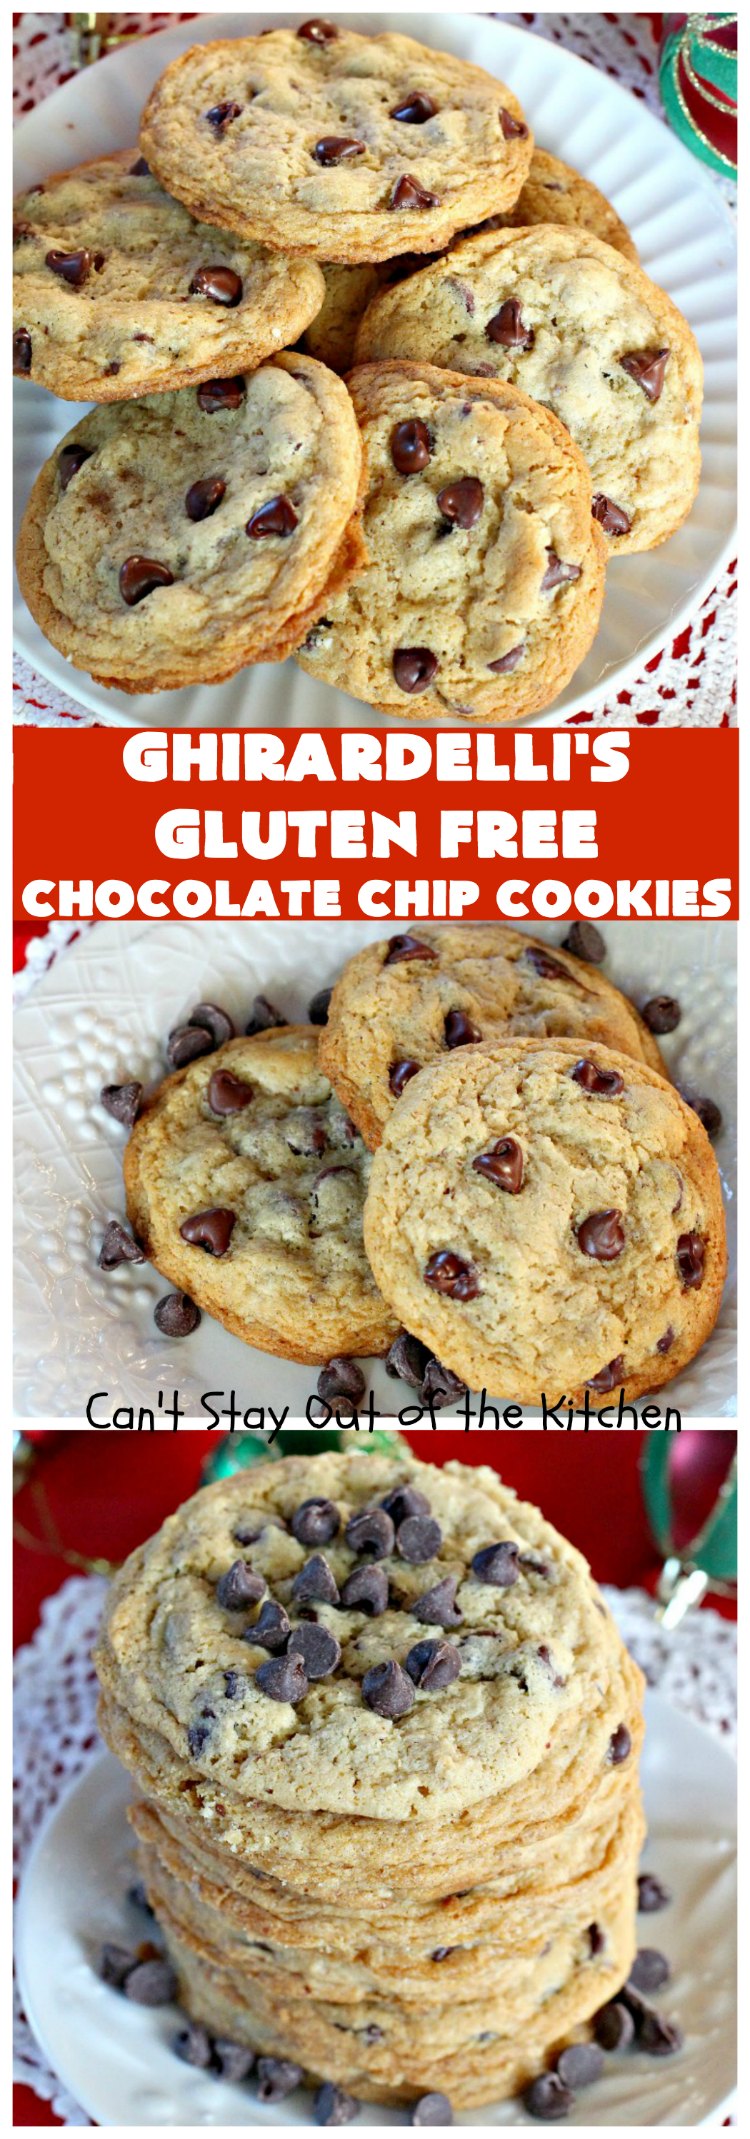 Ghiraardelli's Gluten Free Chocolate Chip Cookies | Can't Stay Out of the Kitchen